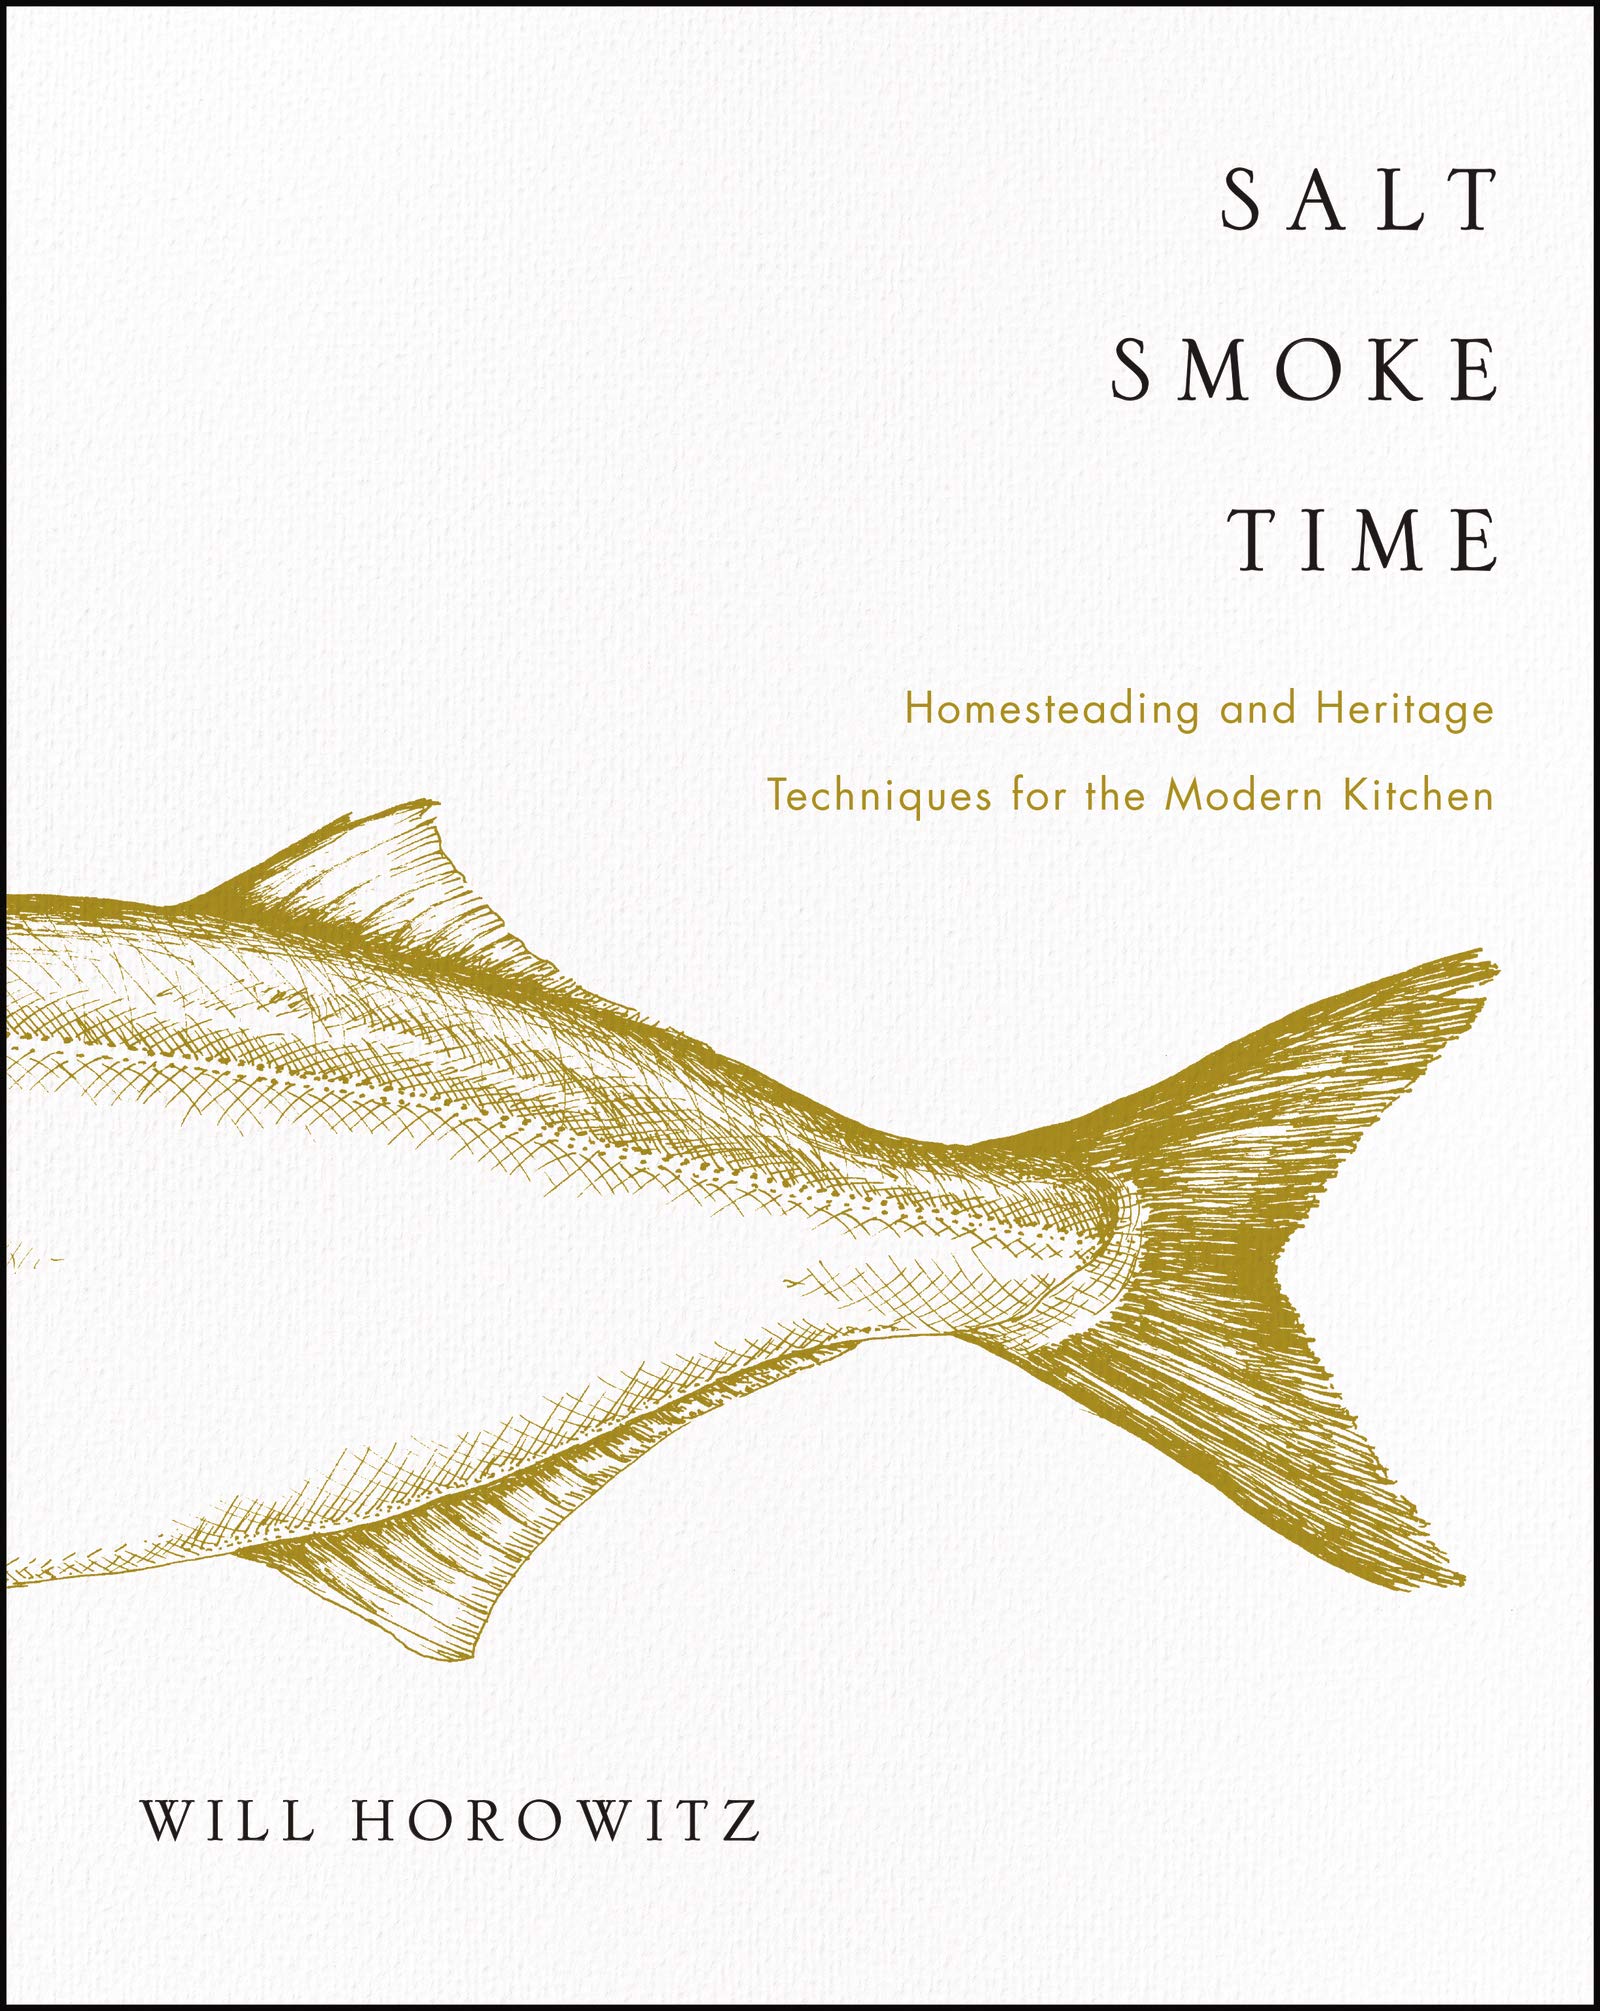 Salt Smoke Time: Homesteading and Heritage Techniques for the Modern Kitchen (Will Horowitz)